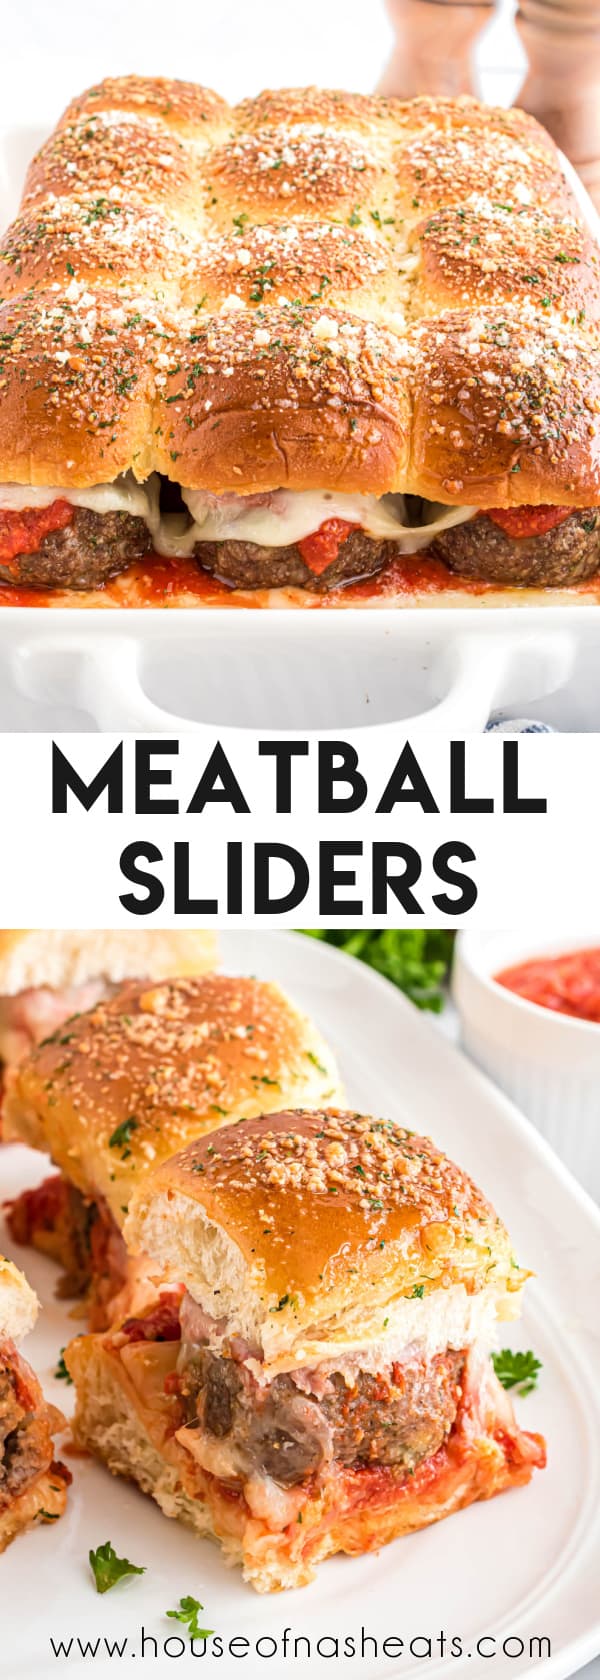 A collage of images of meatball sliders with text overlay.